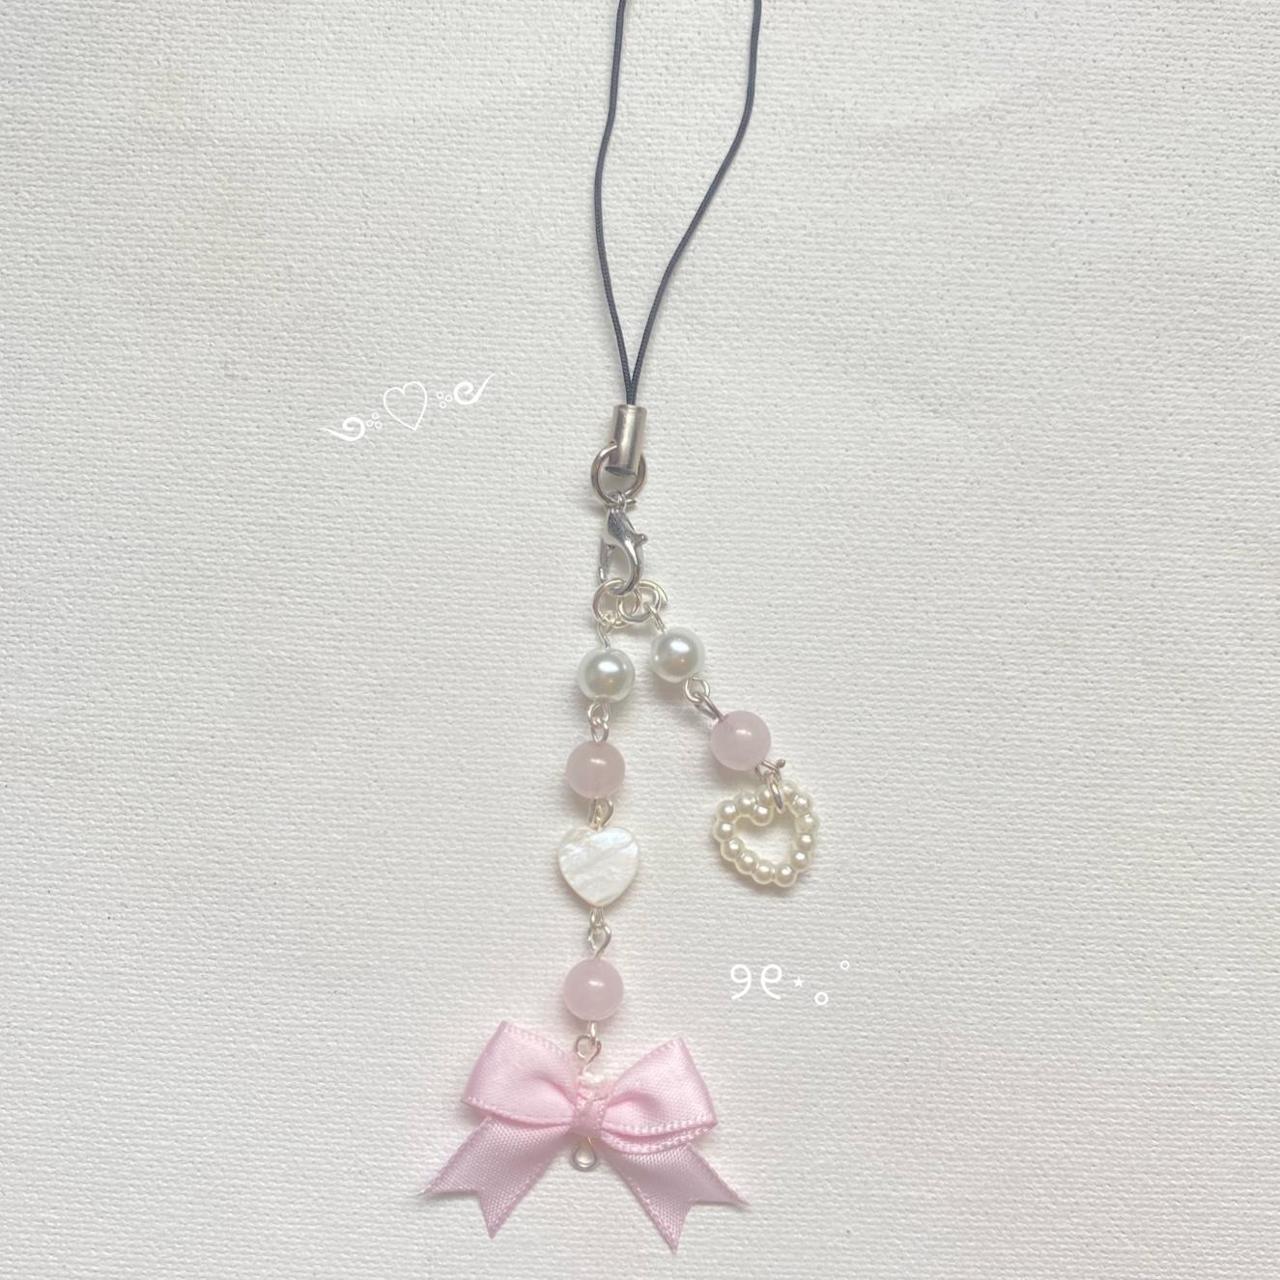 Coquette bow phone charm ୨୧⋆｡˚ Dm for any... - Depop